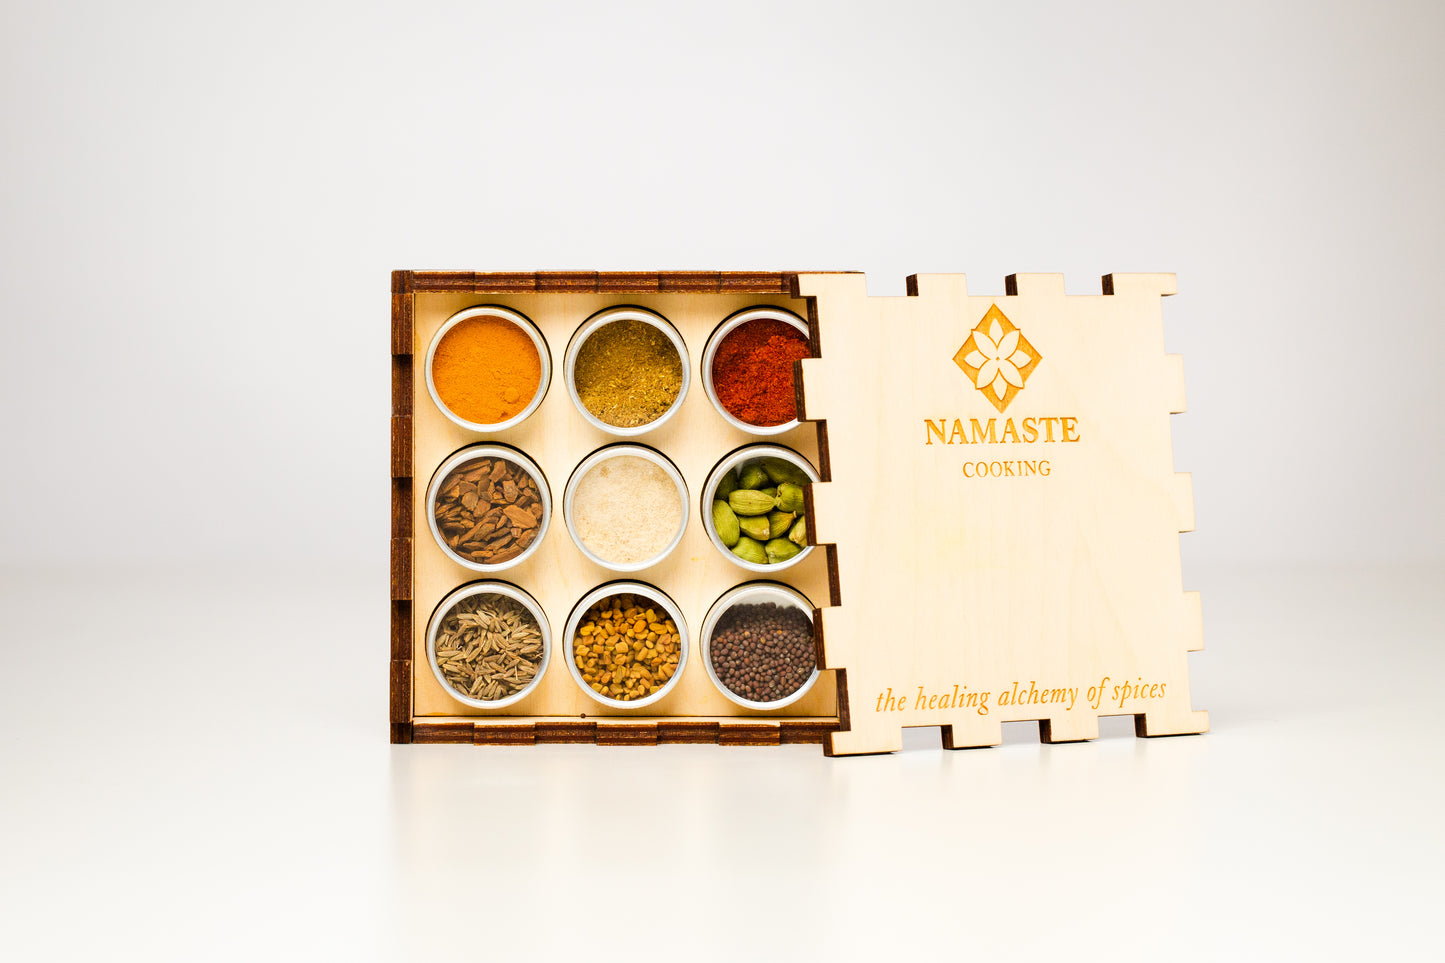 SUNISTANAI Ayurvedic Handcrafted Spice Box full of all the staple Ayurveda Spices to enhance one's culinary experience.